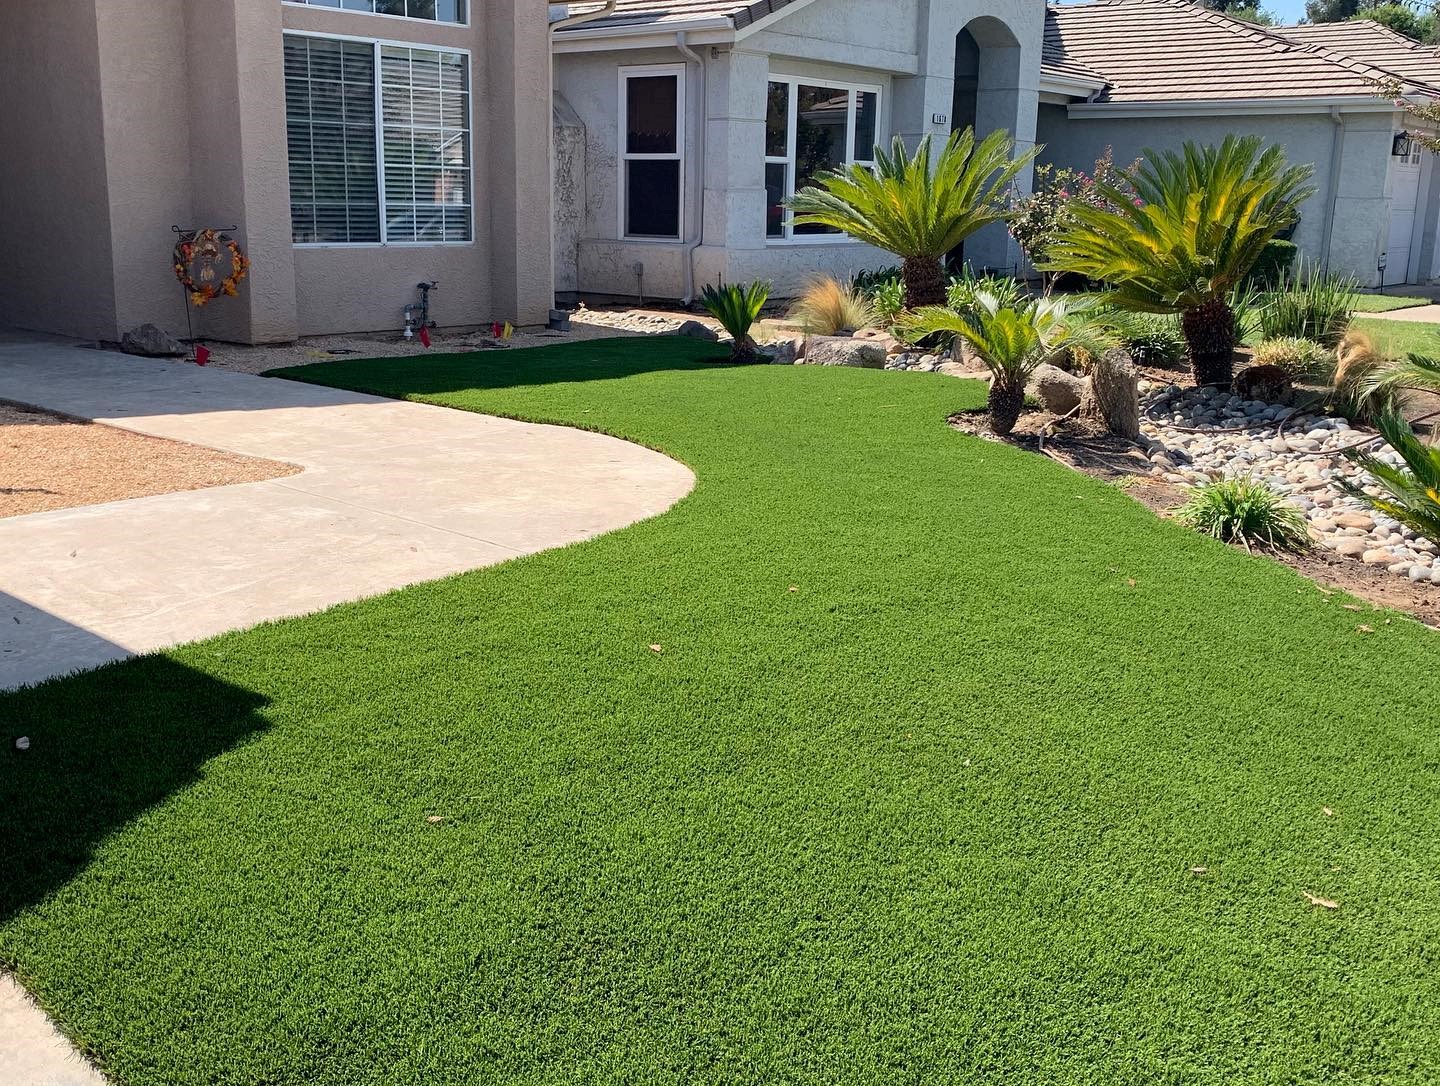 make-installing-synthetic-grass-a-2020-resolution-synlawn-central-california